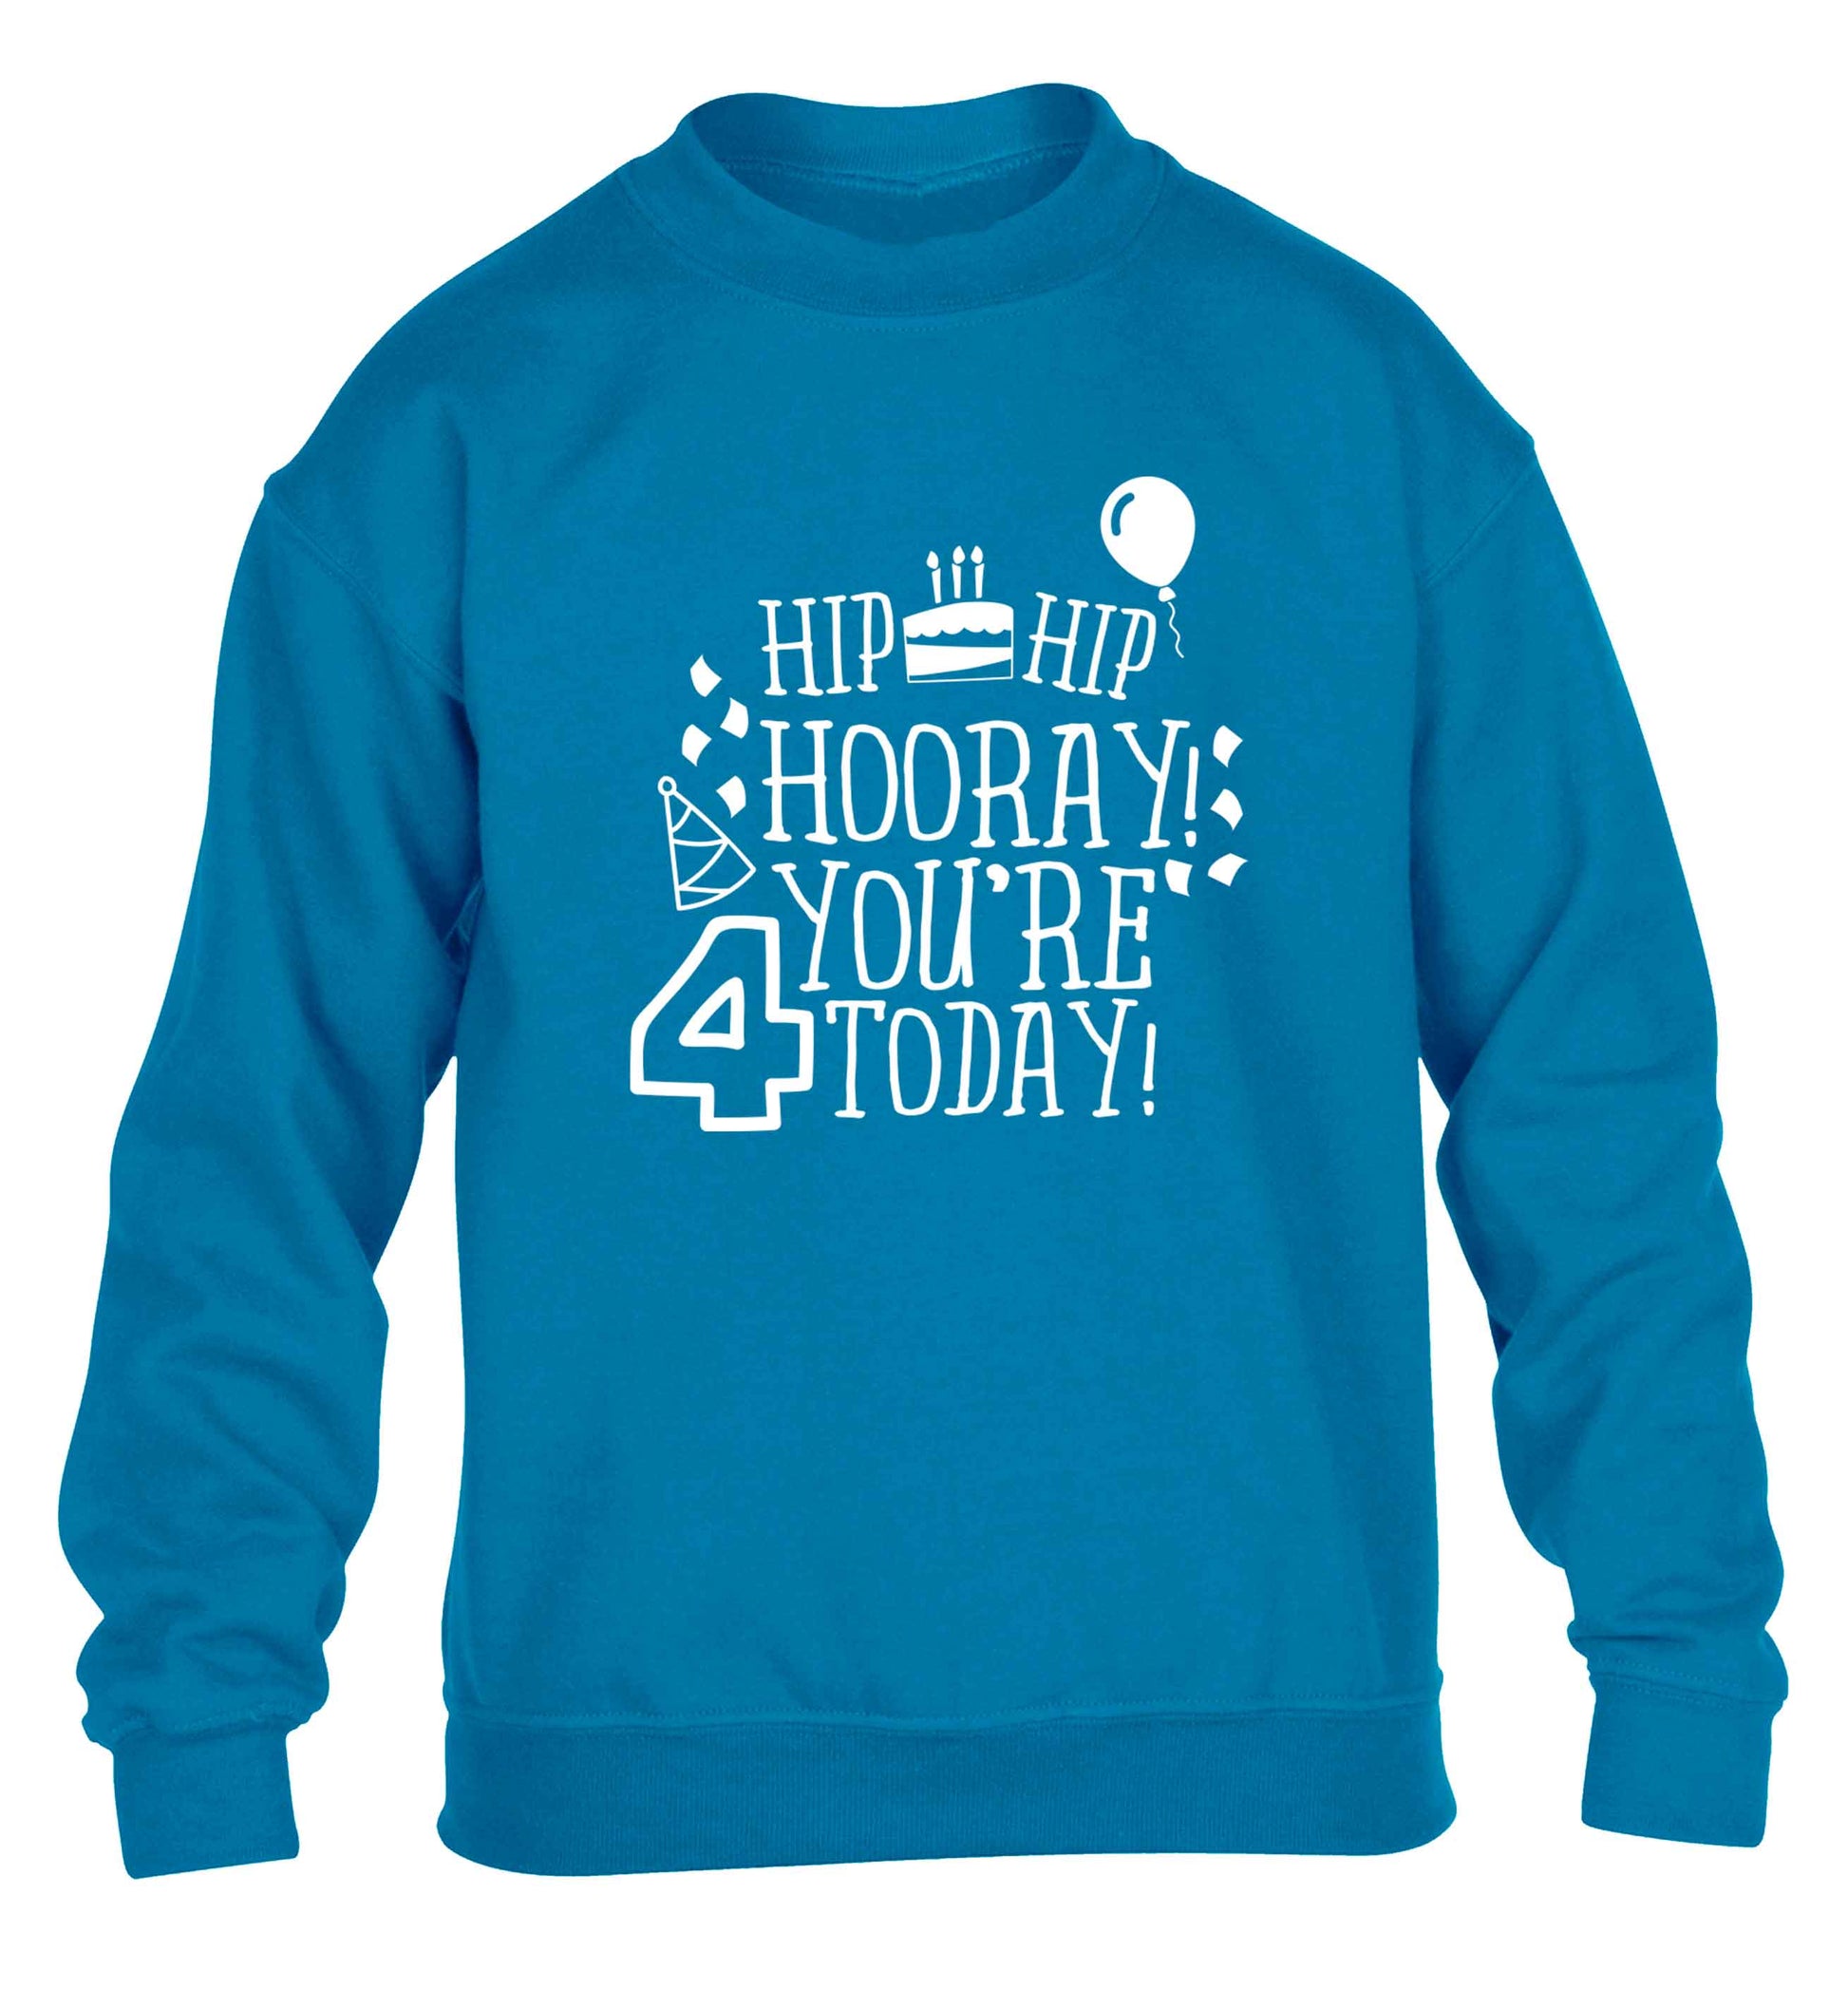 Hip hip hooray you're four today!children's blue sweater 12-13 Years